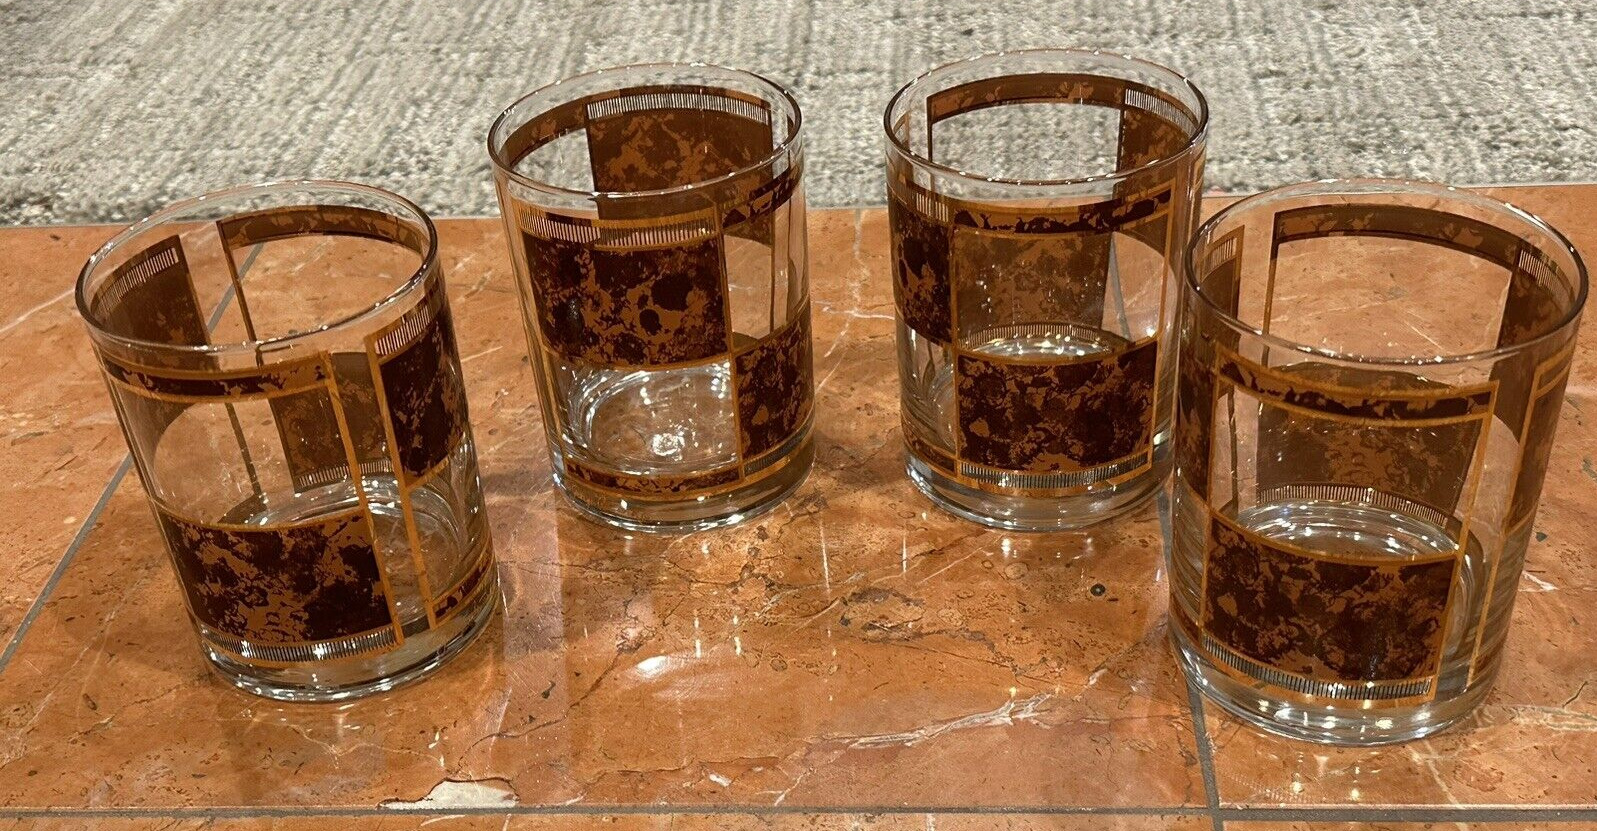 GEORGES BRIARD DOUBLE OLD FASHIONED WINDOW PANE GLASSES SET 4 BROWN GOLD LN